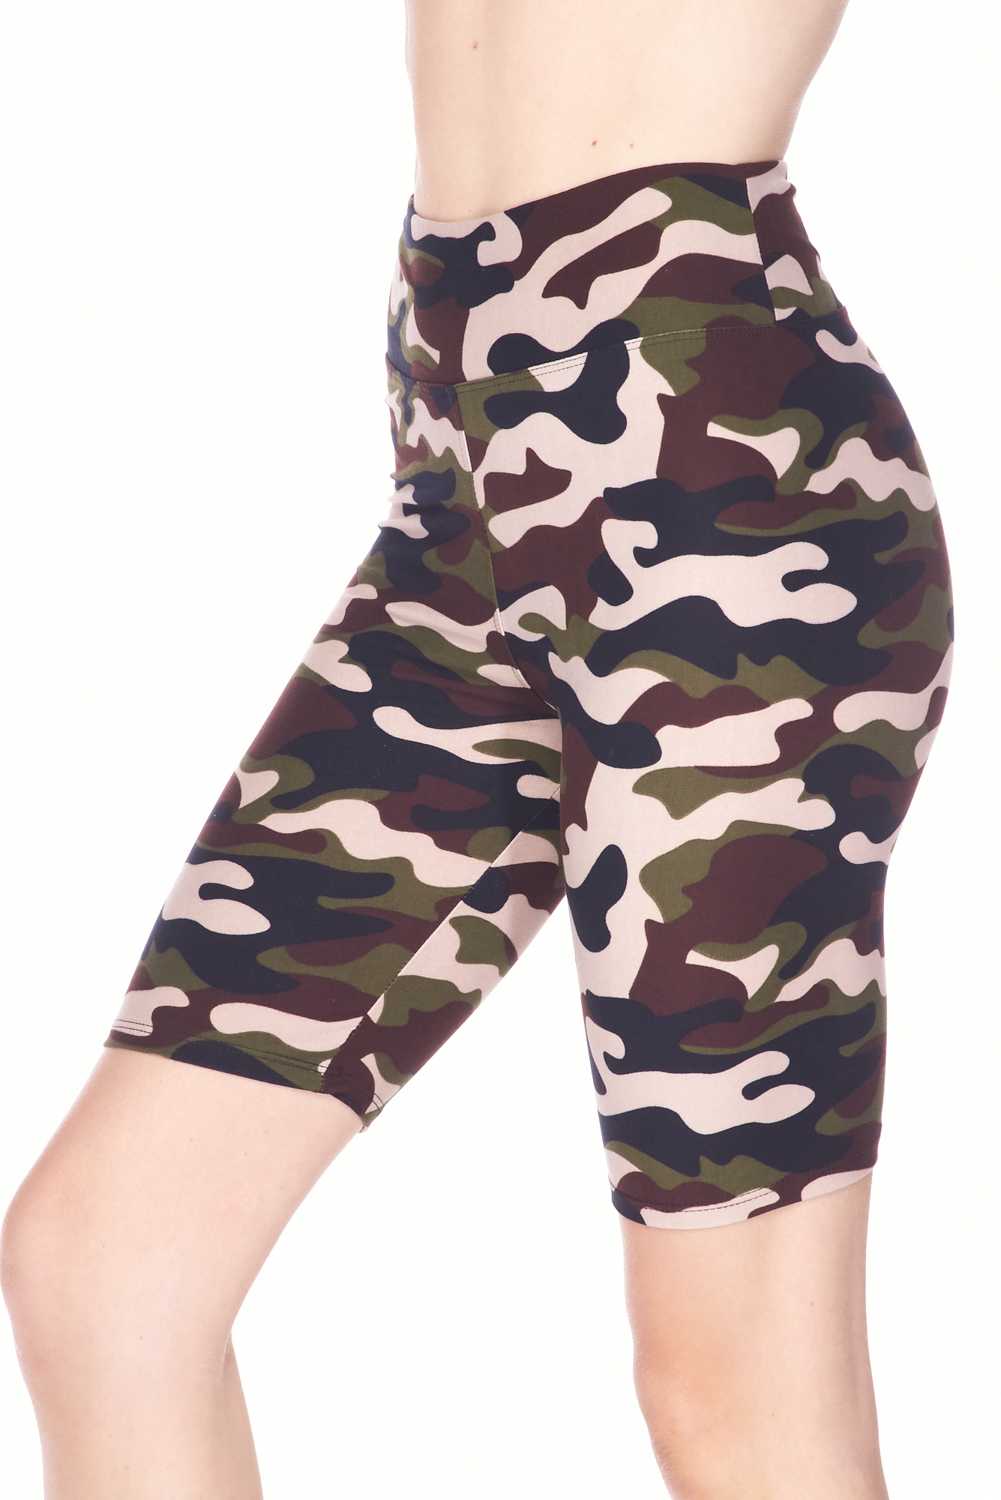 Wholesale Buttery Smooth Flirty Camouflage Biker Shorts - 3 Inch Waist Band